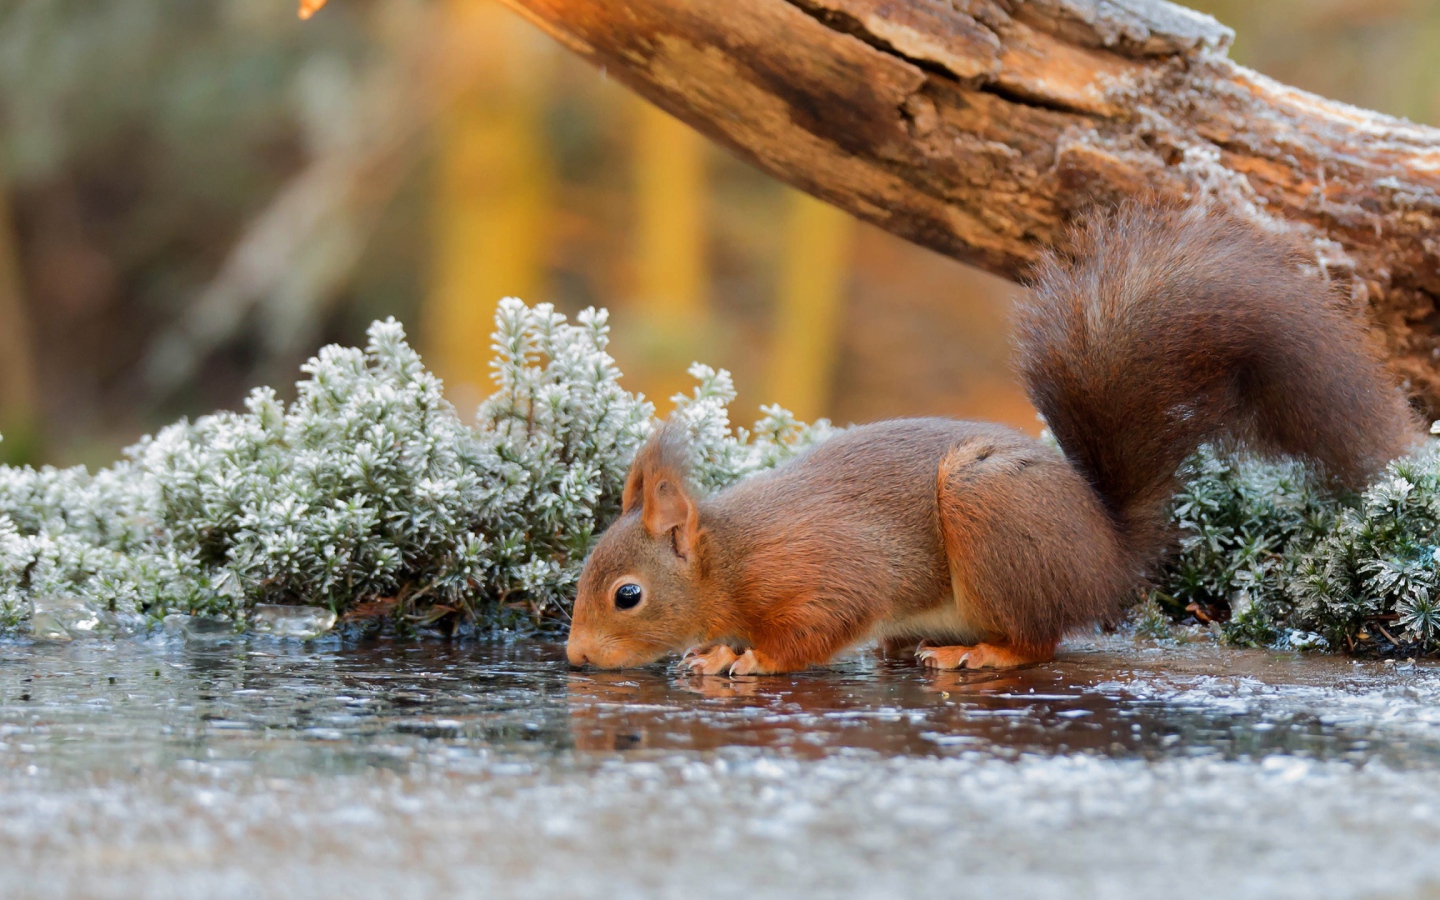 Little red squirrel drinks water from a puddle near an old tree